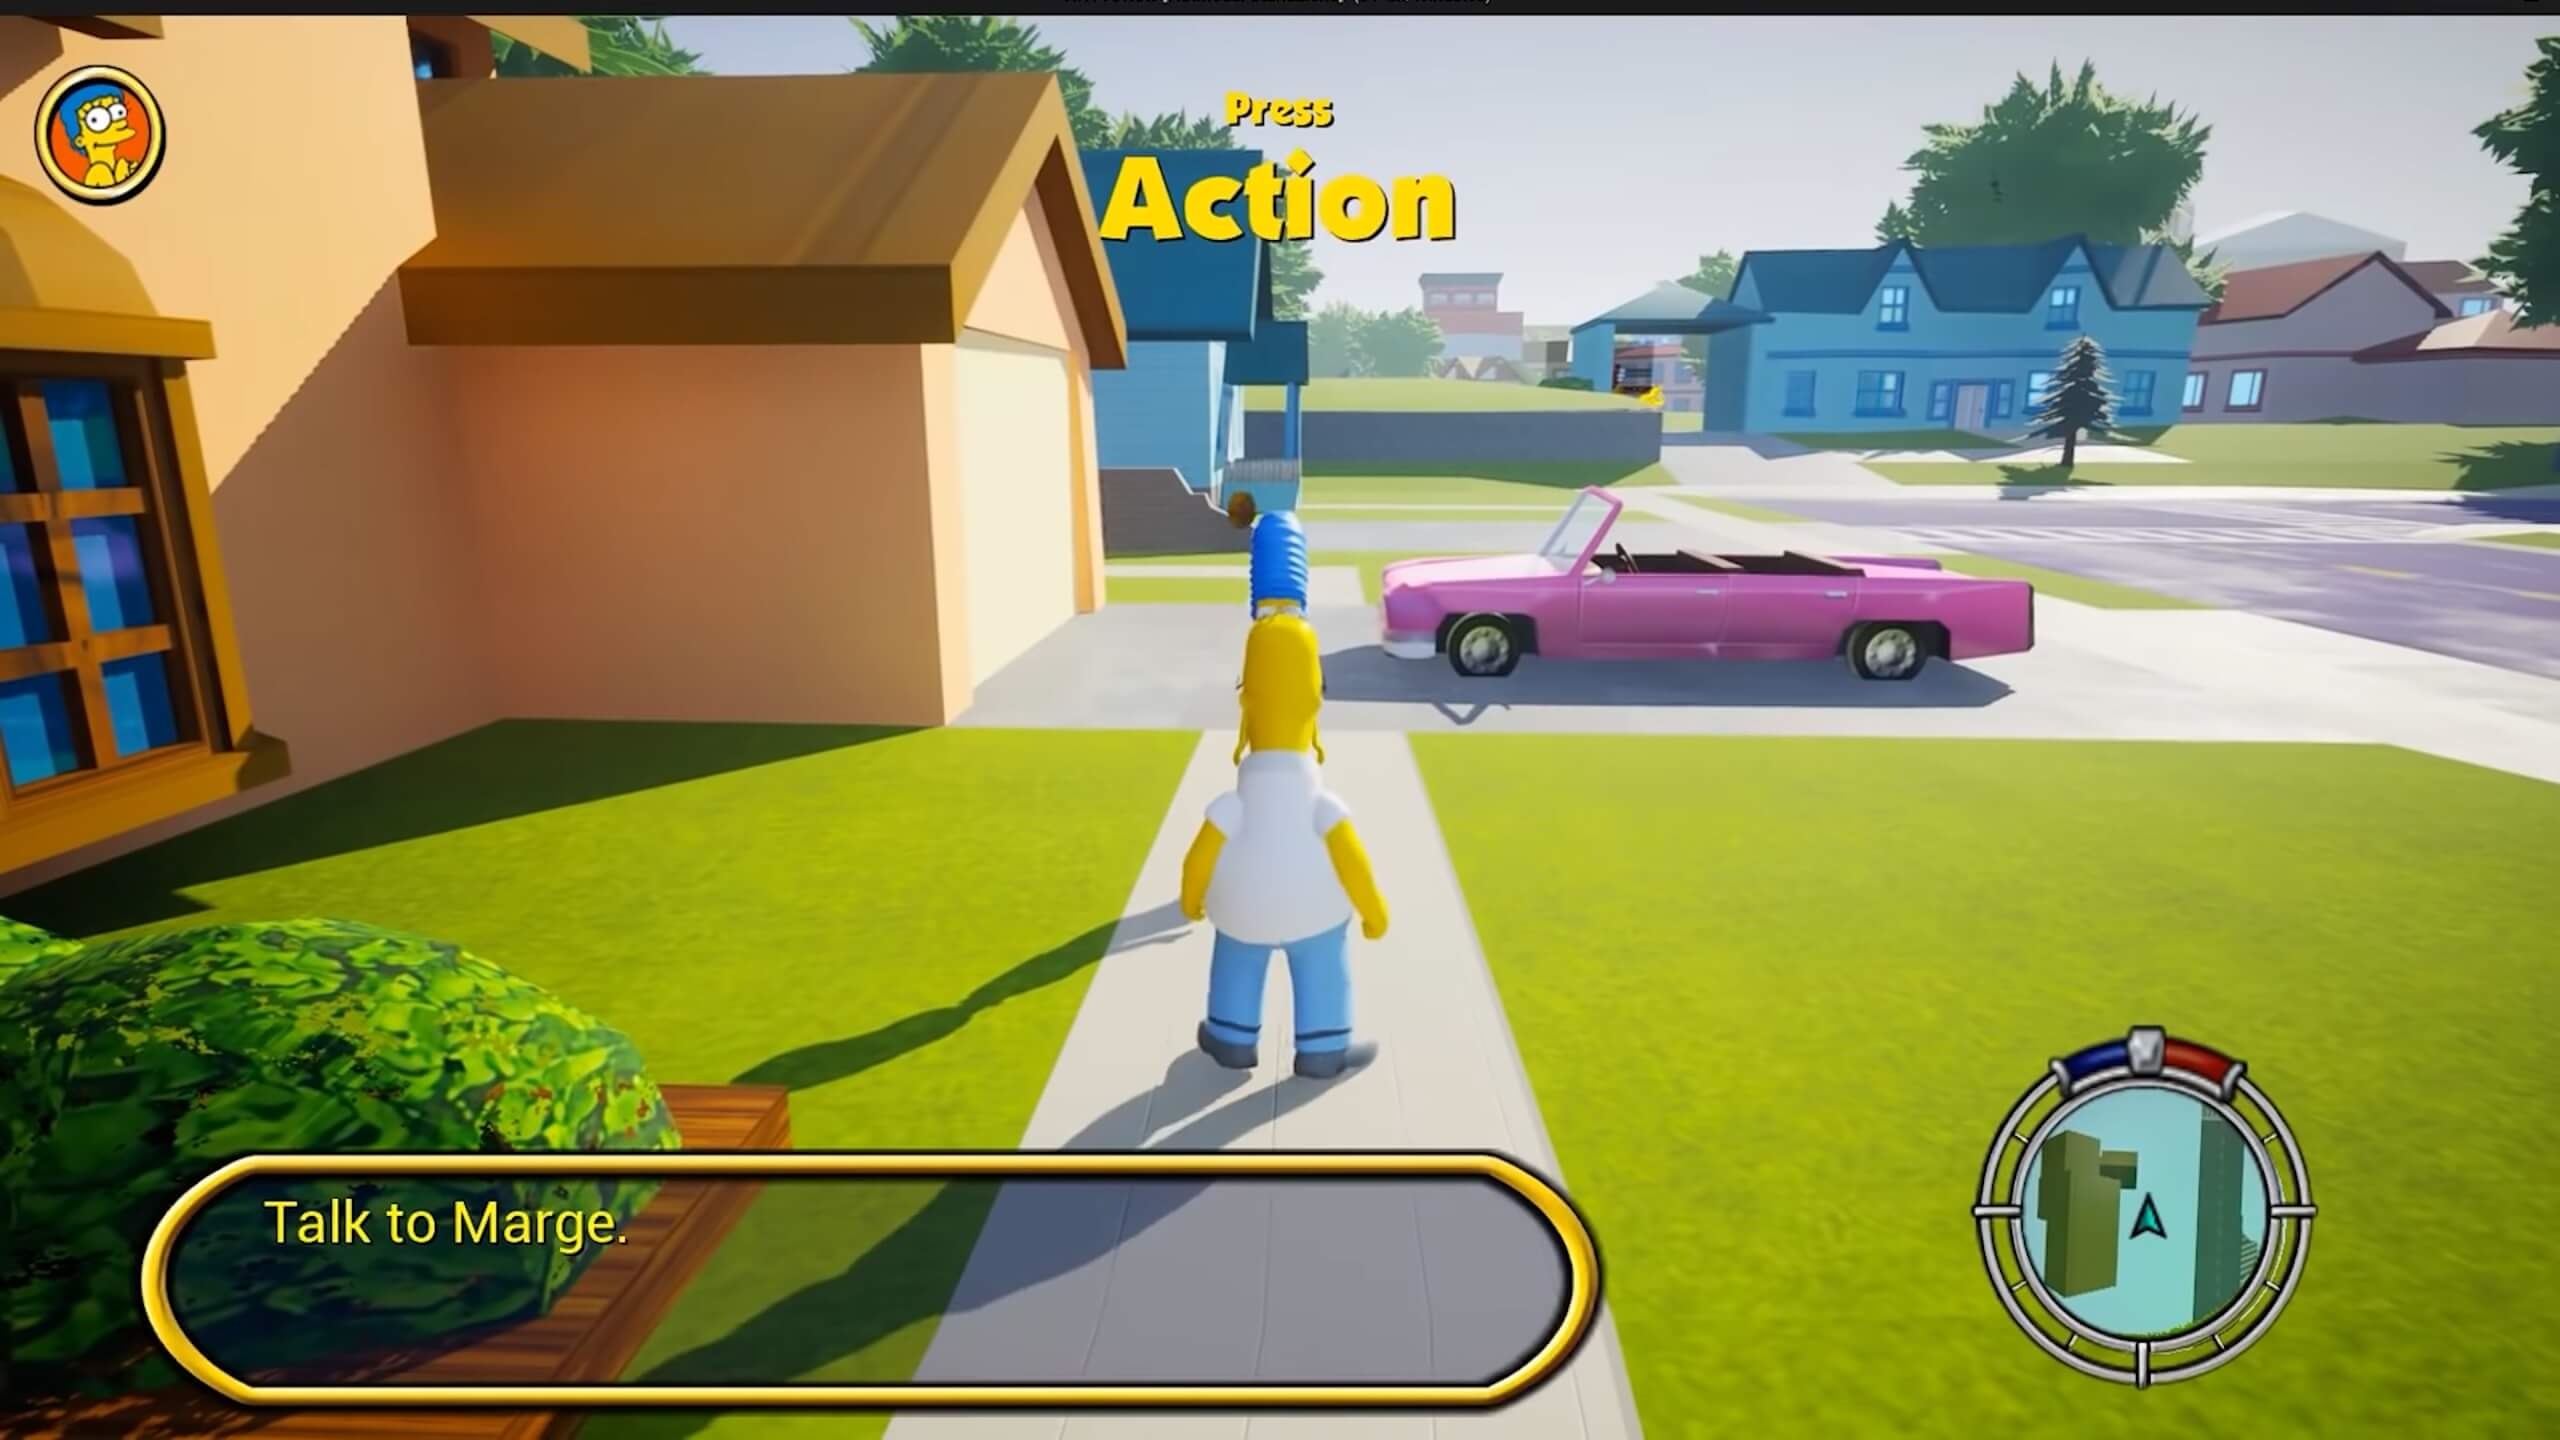 The Simpsons: Hit And Run